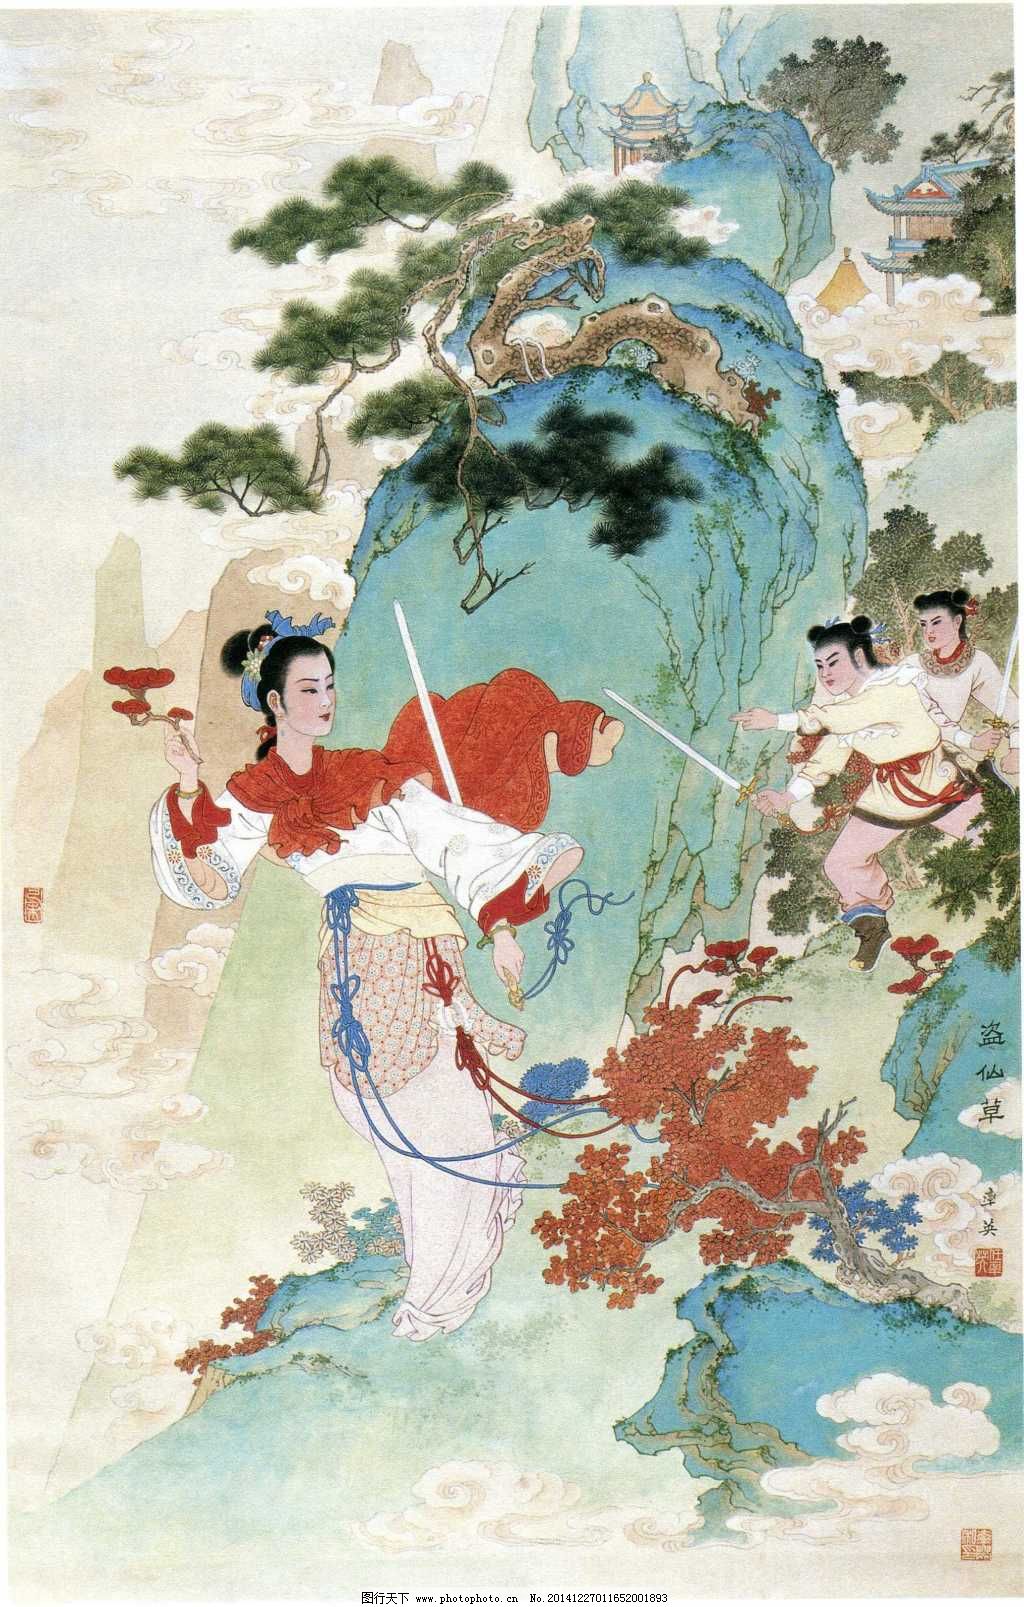 Lingzhi in myths